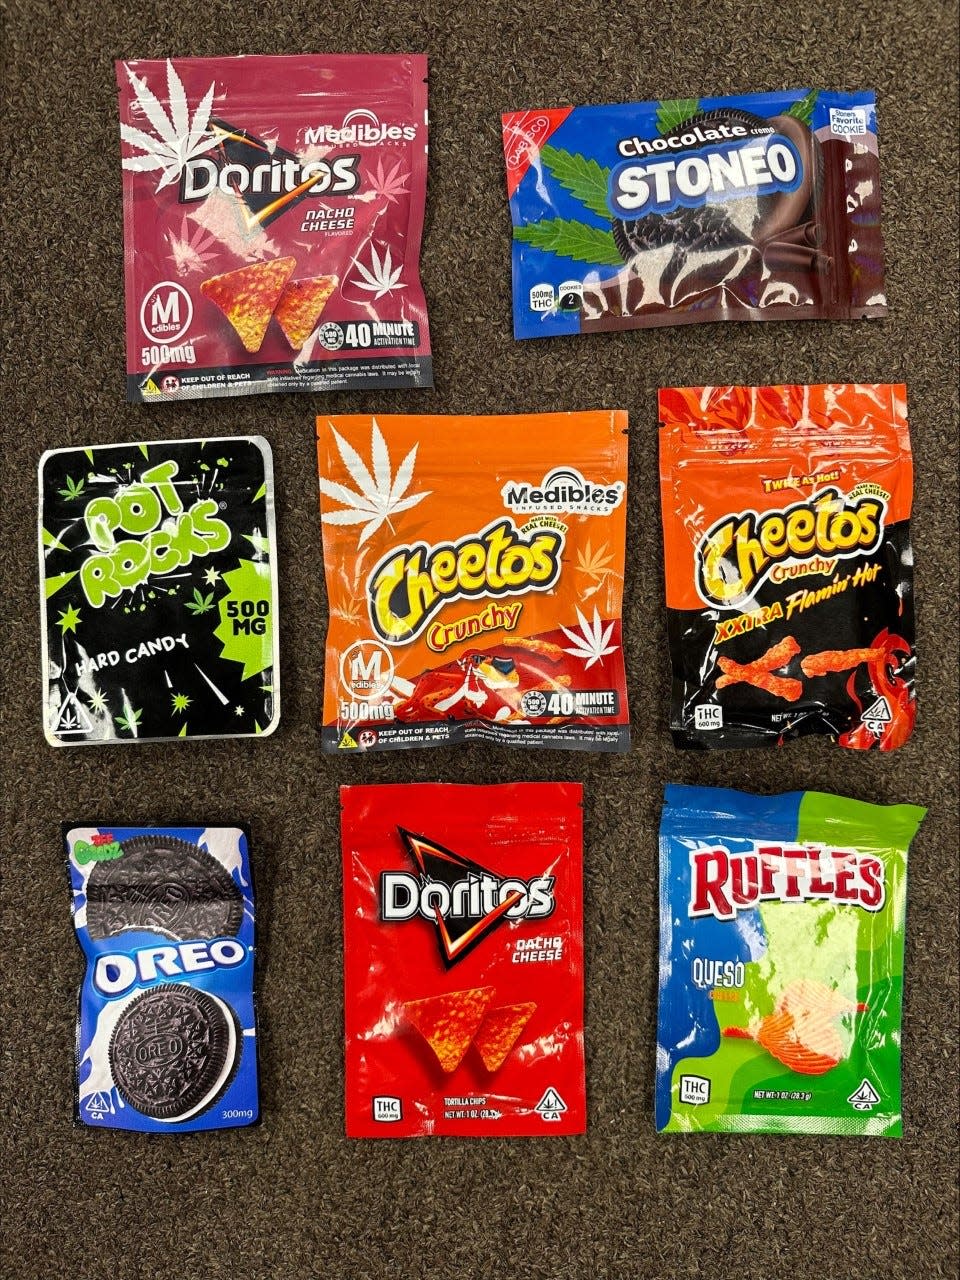 After an arrest and drug seizure in 2022, the Pawtucket police advised parents to keep an eye out for marijuana edibles in packages that look similar to packaging for common snacks.